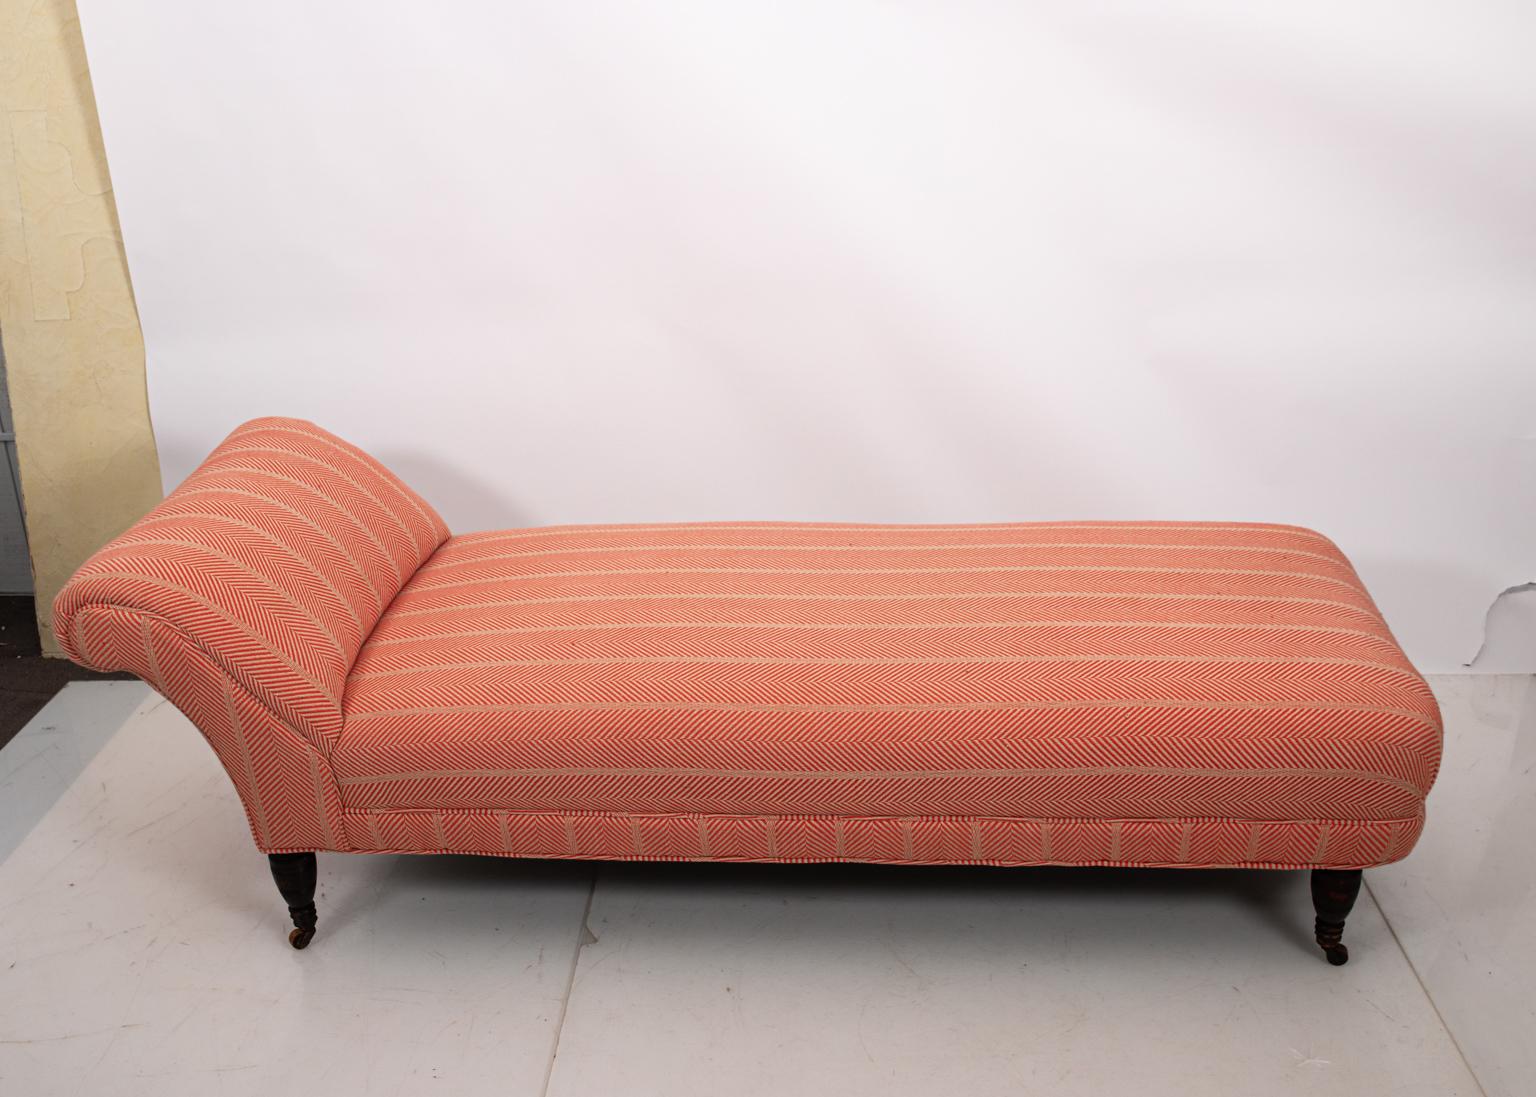 Victorian chaise lounge Recamier reupholstered in orange and beige fabric with turned legs on castors, circa 1880s. Please note of wear consistent with age to the wood frame. Made in the United States.